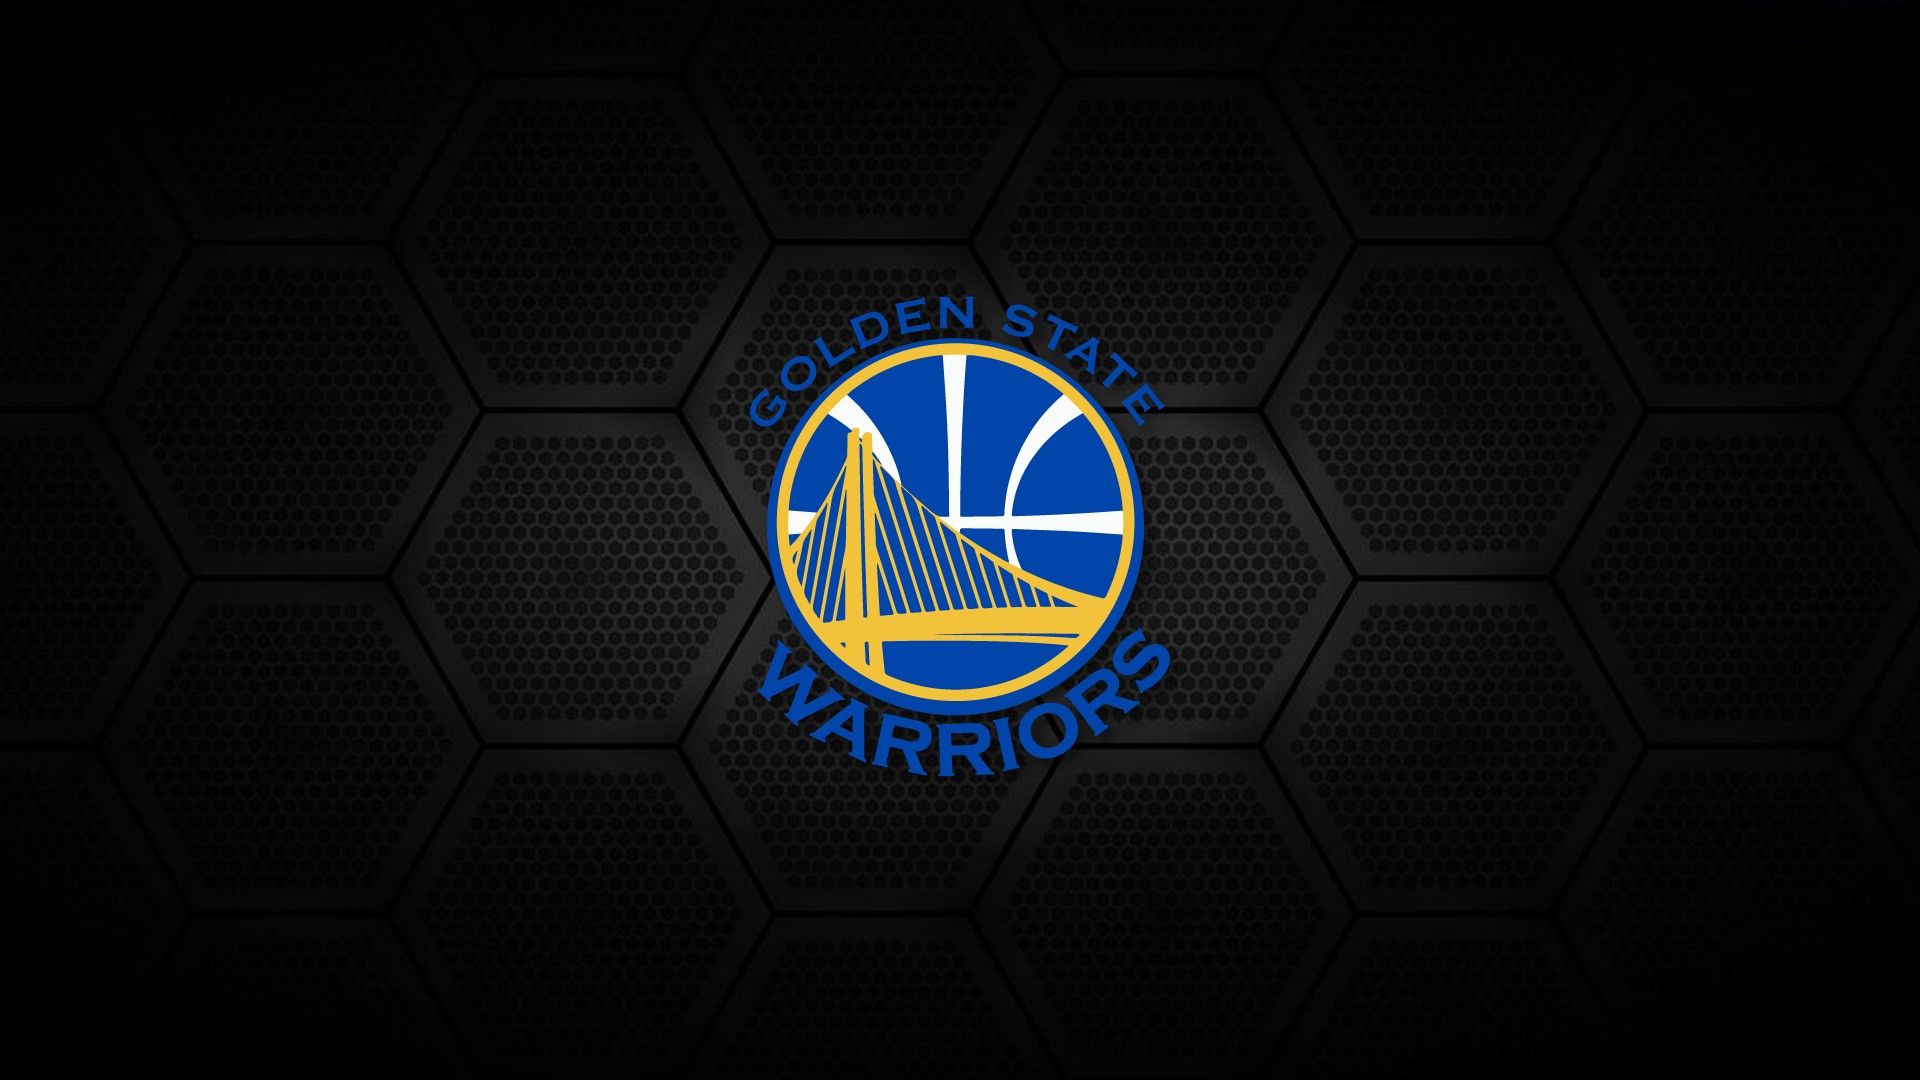 Golden State Warriors Logo For Mac Wallpaper With Image